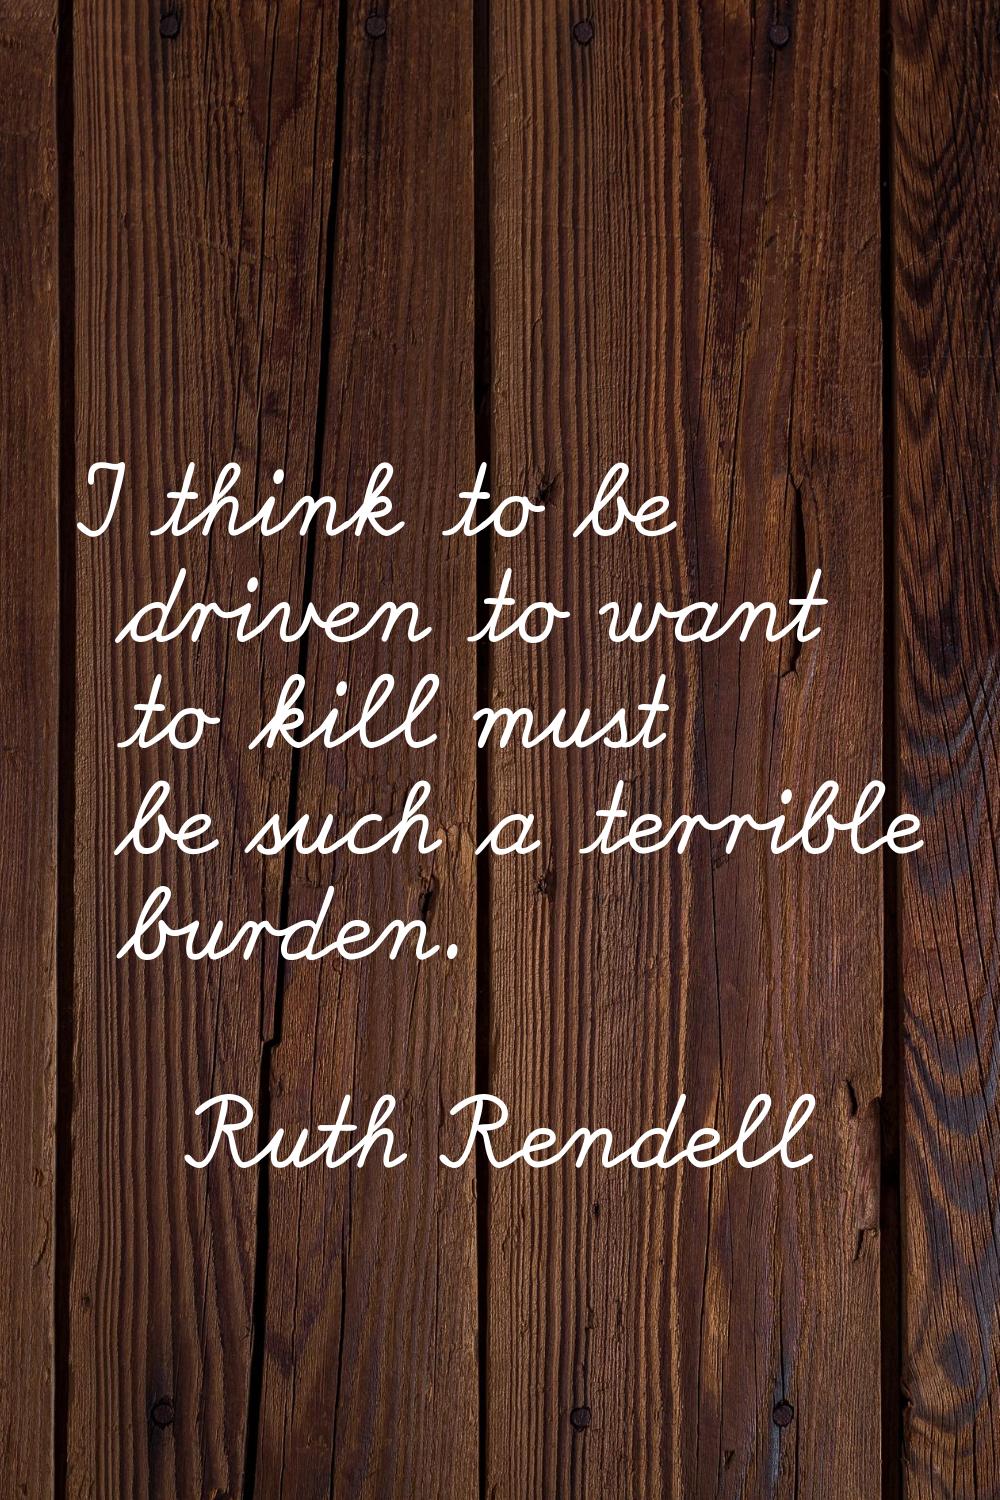 I think to be driven to want to kill must be such a terrible burden.